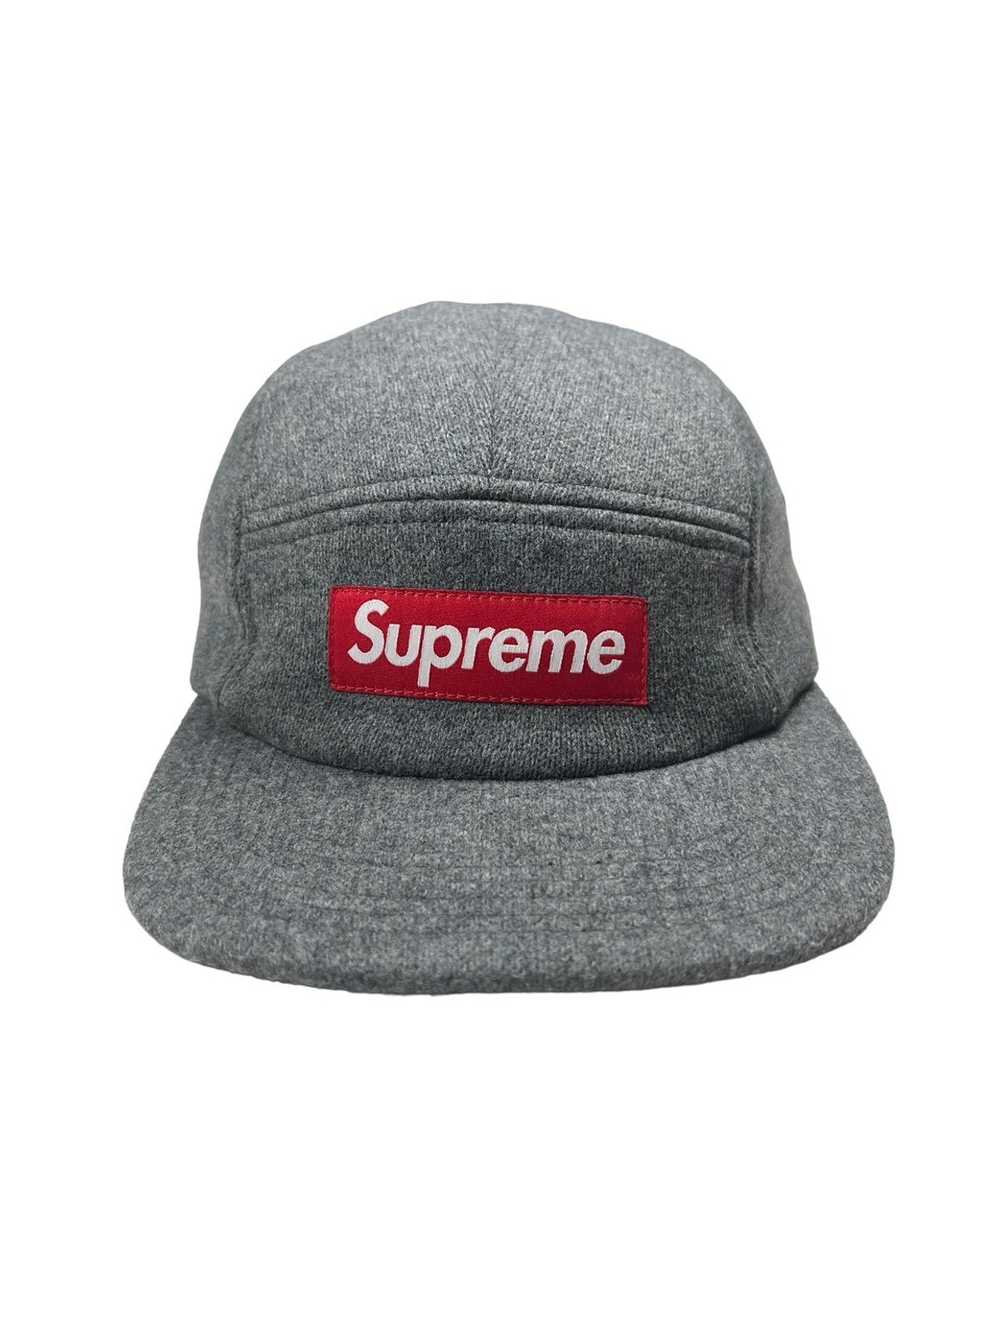 Supreme Supreme Wool Fitted Camp Cap - image 2